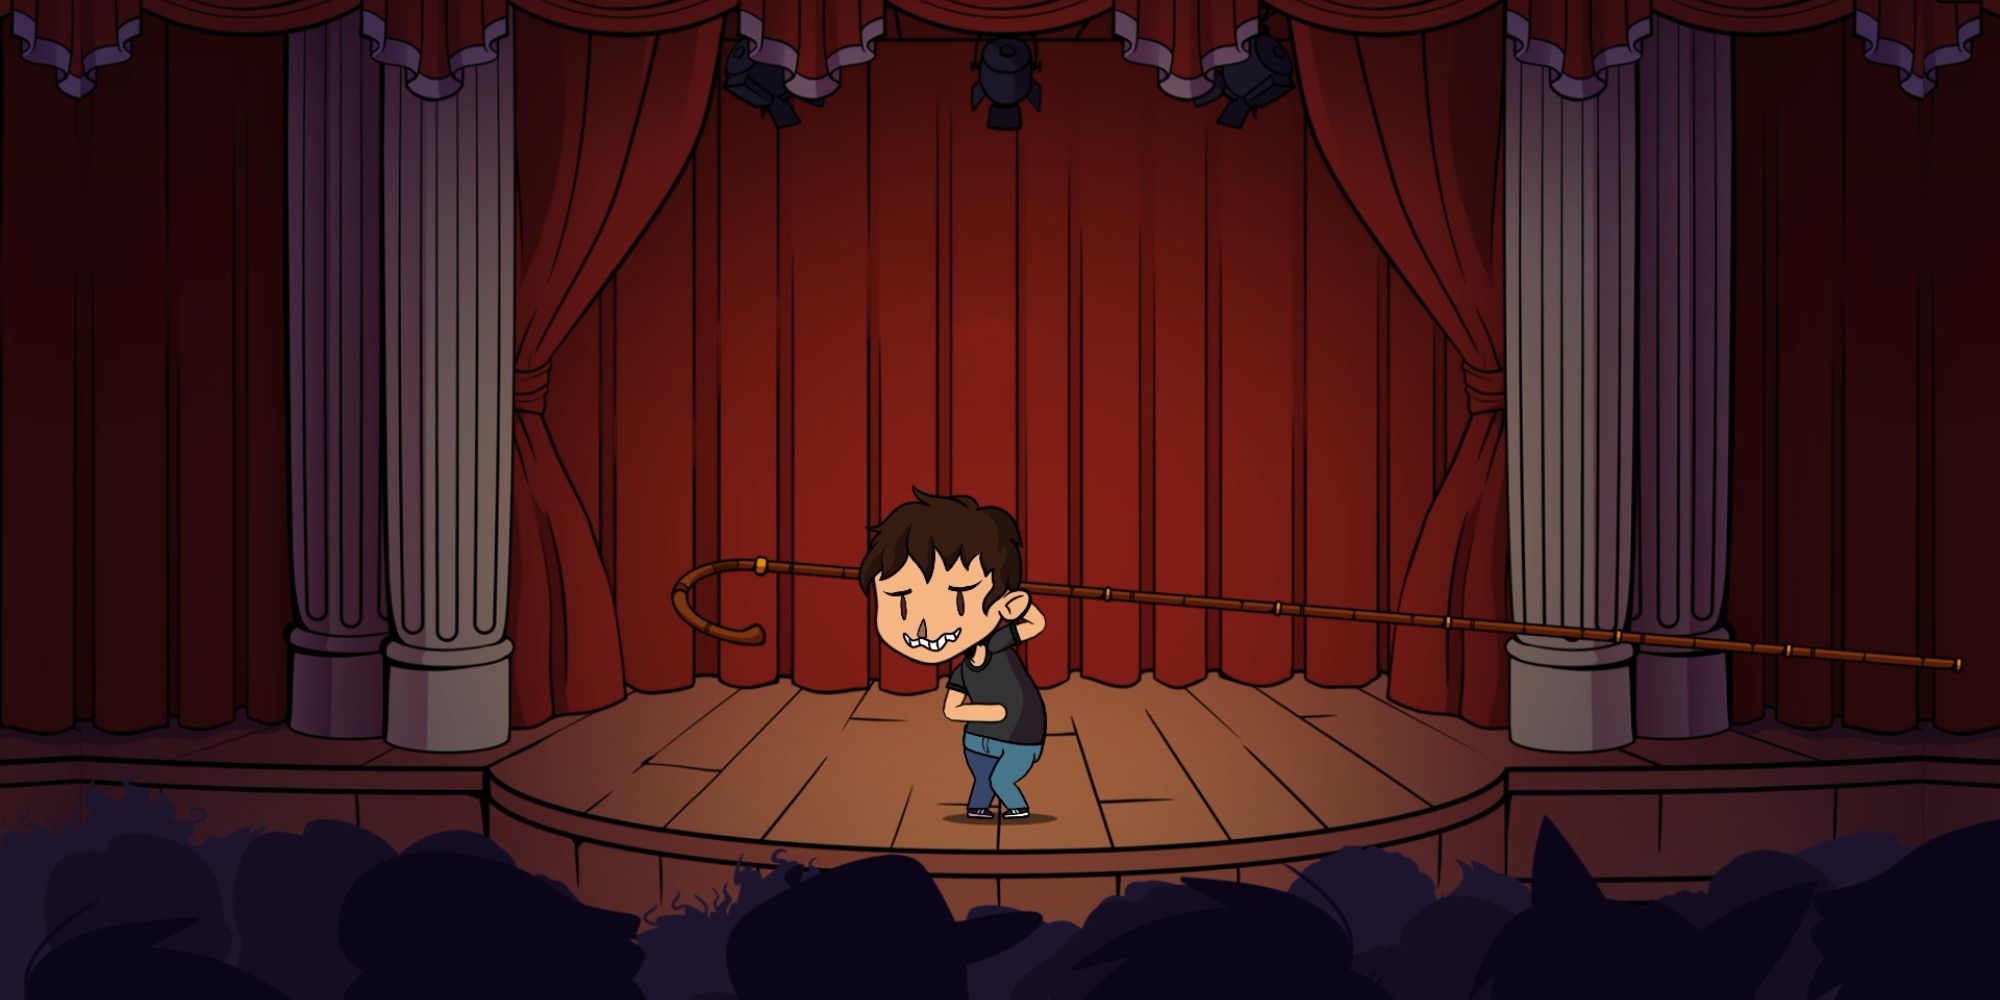 A character about to be hooked off a stage.